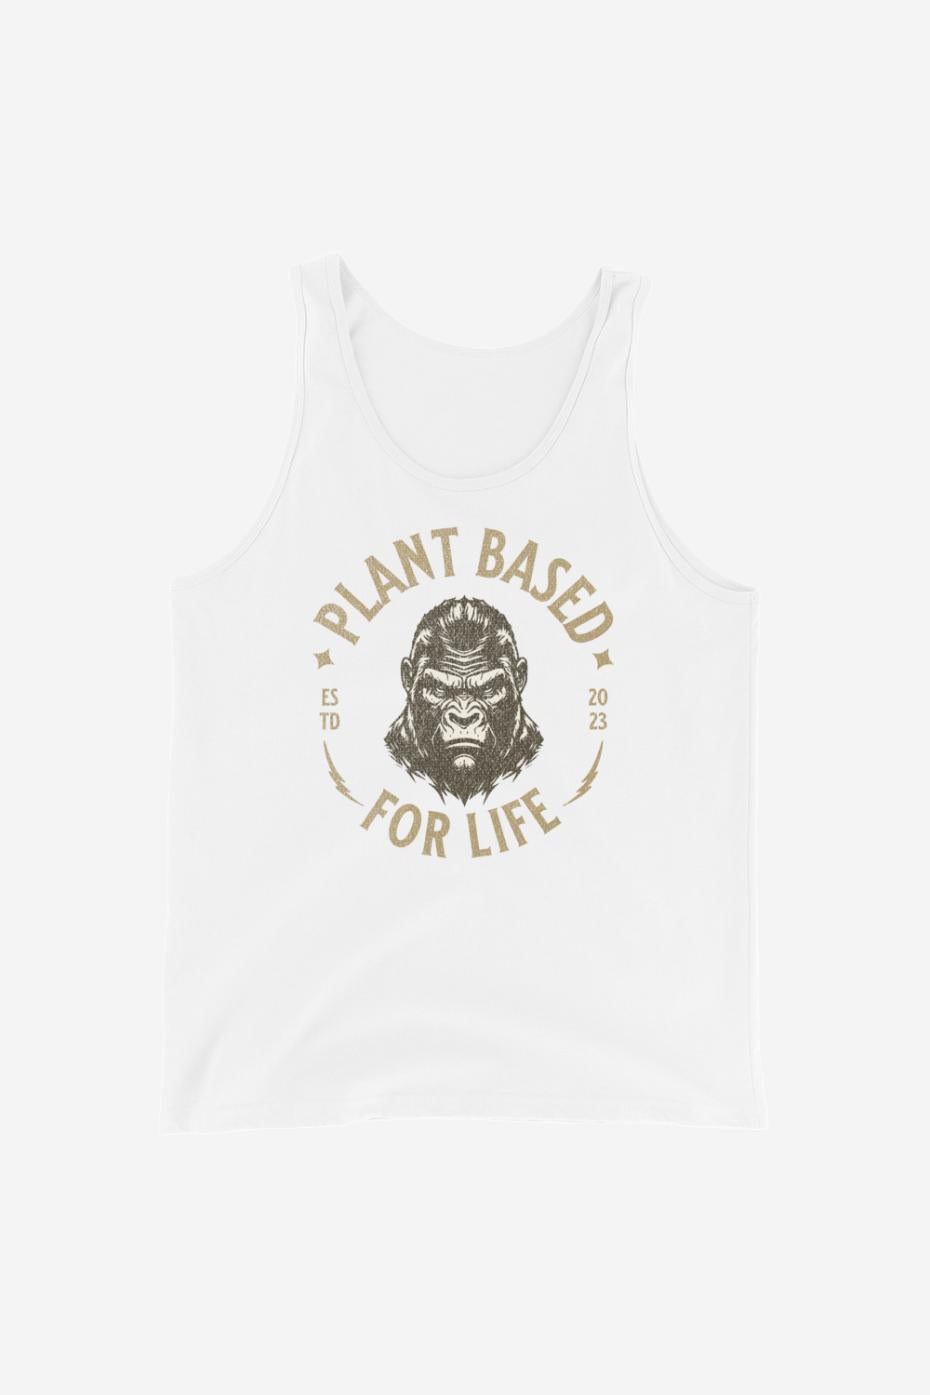 Plant Based For Life - Unisex Tank Top